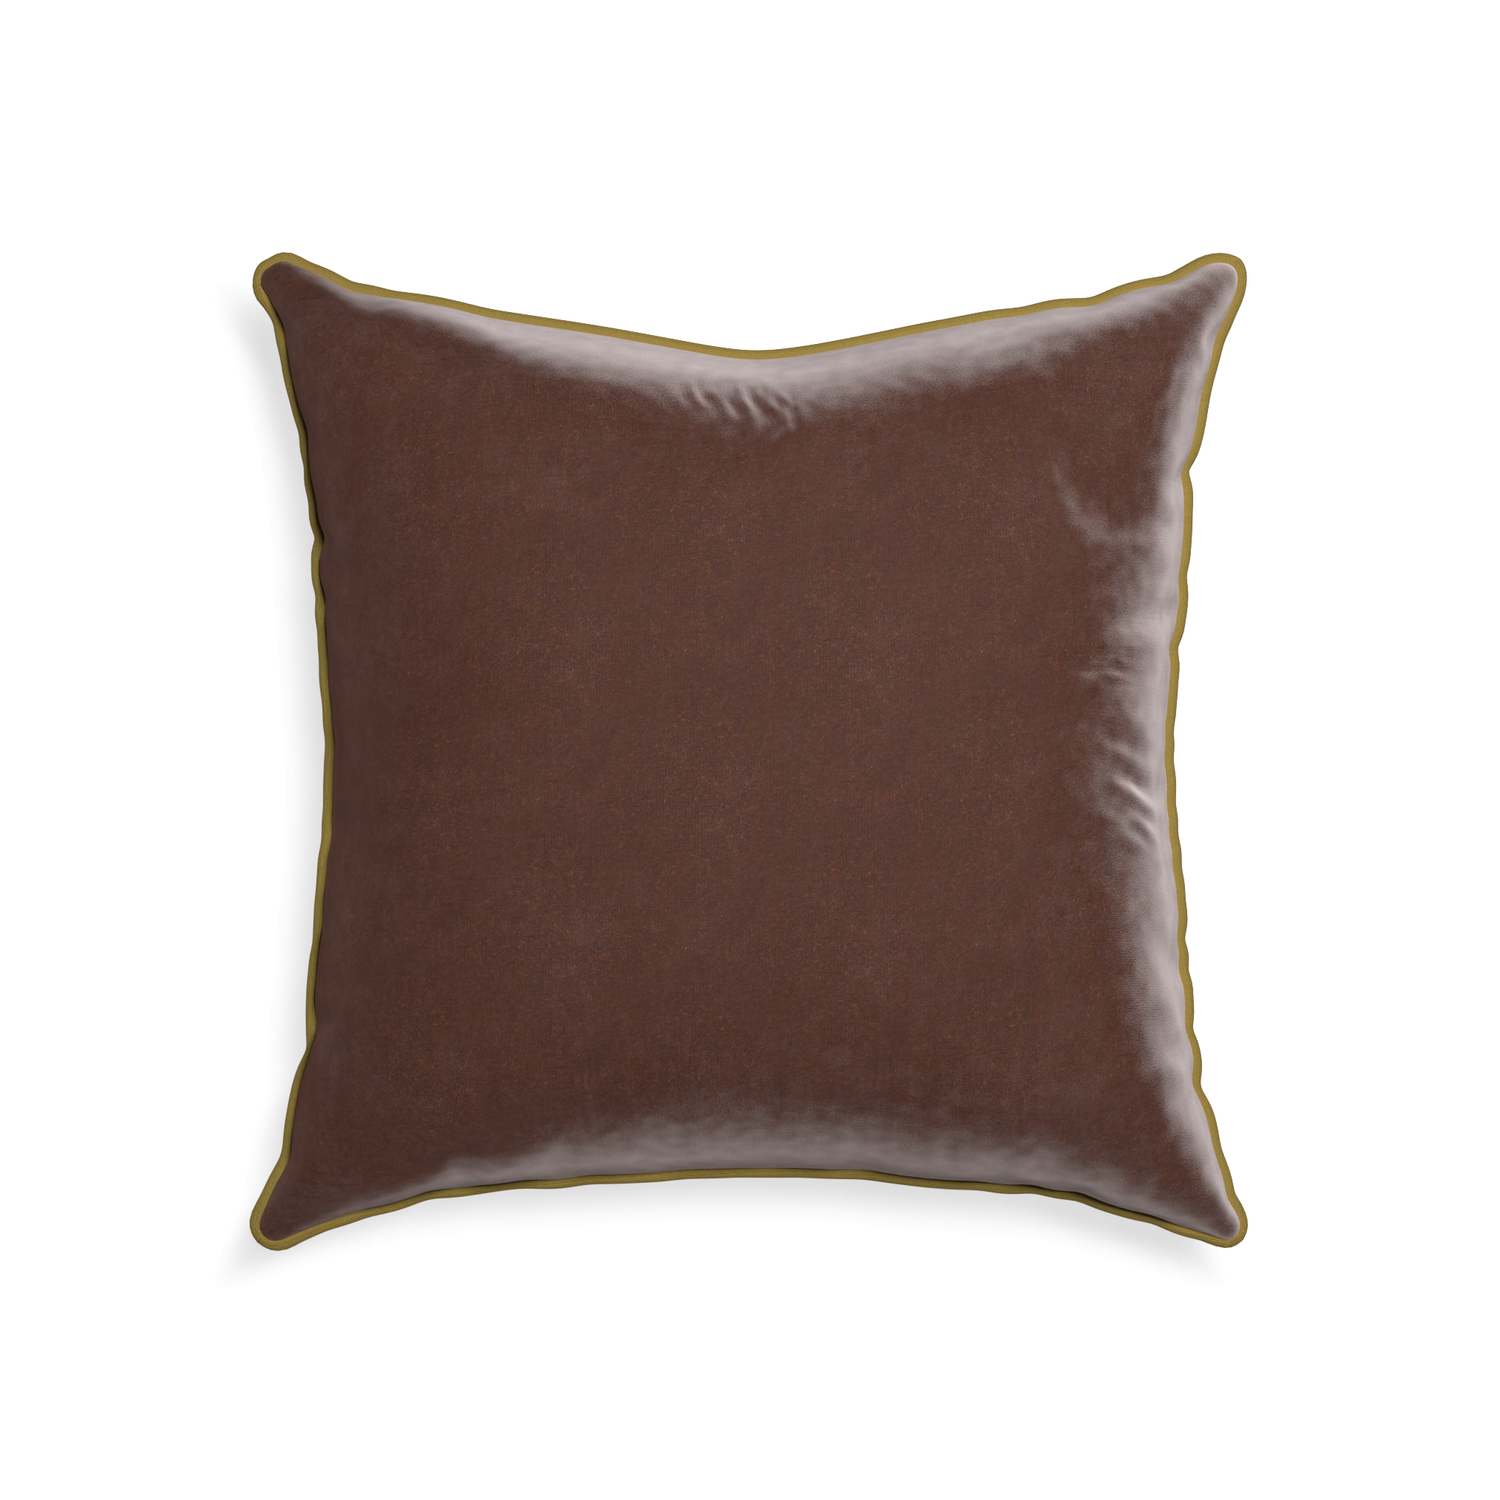 22-square walnut velvet custom brownpillow with c piping on white background